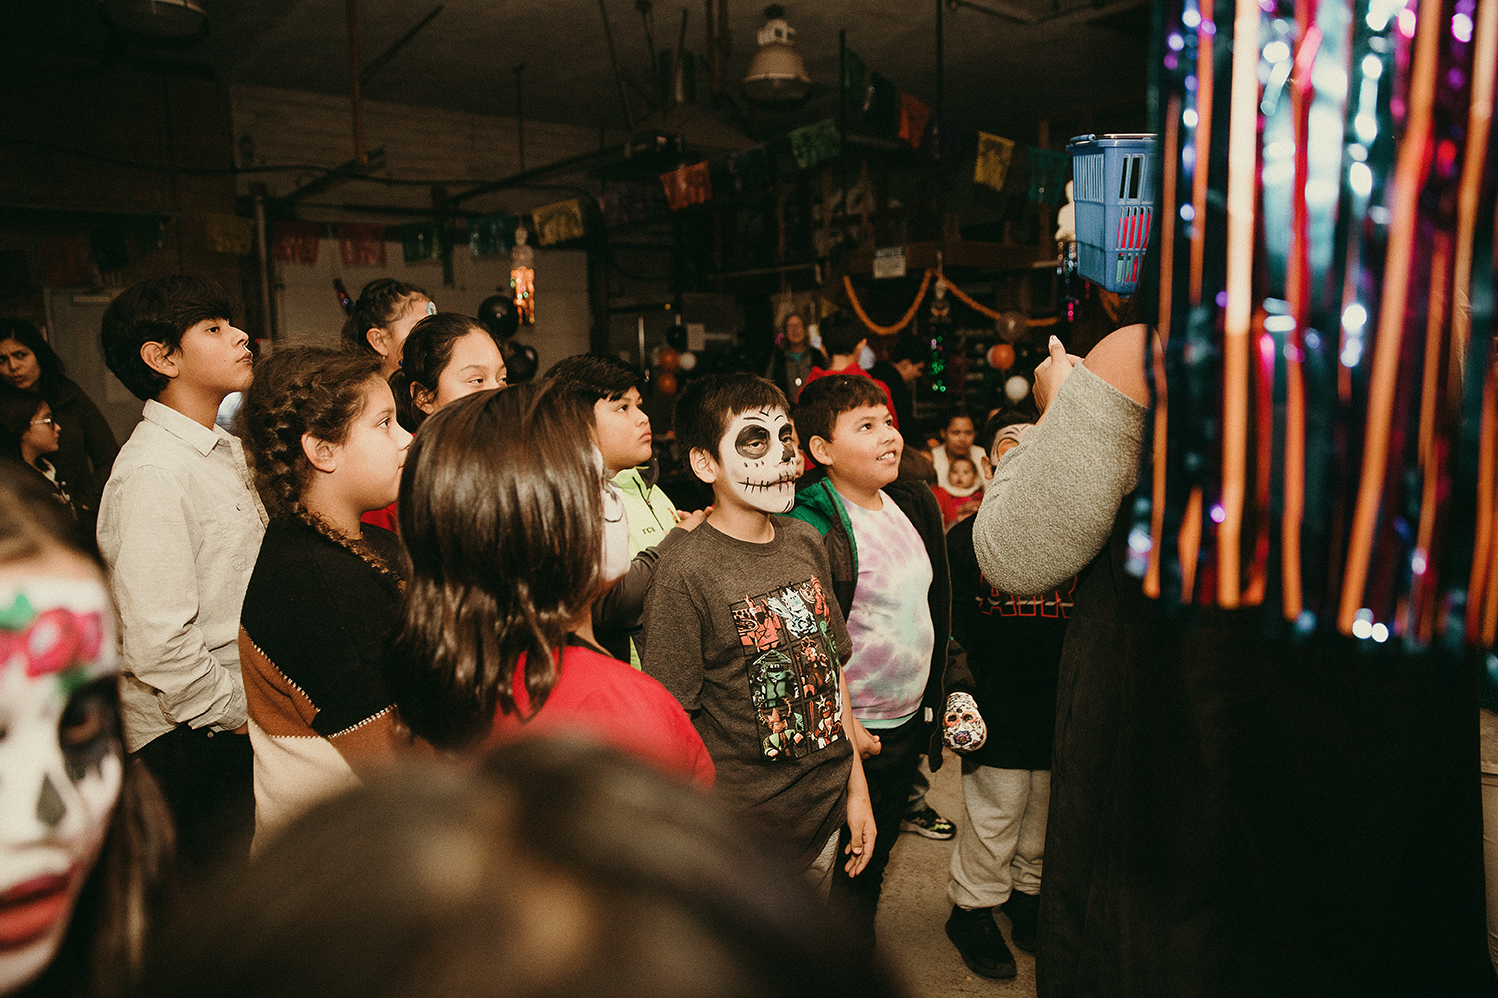 A group of young people stand in front of a offrenda at a at Dia de Los Muertos cultural celebration. A yound boy in the front has his head painted as a skill.